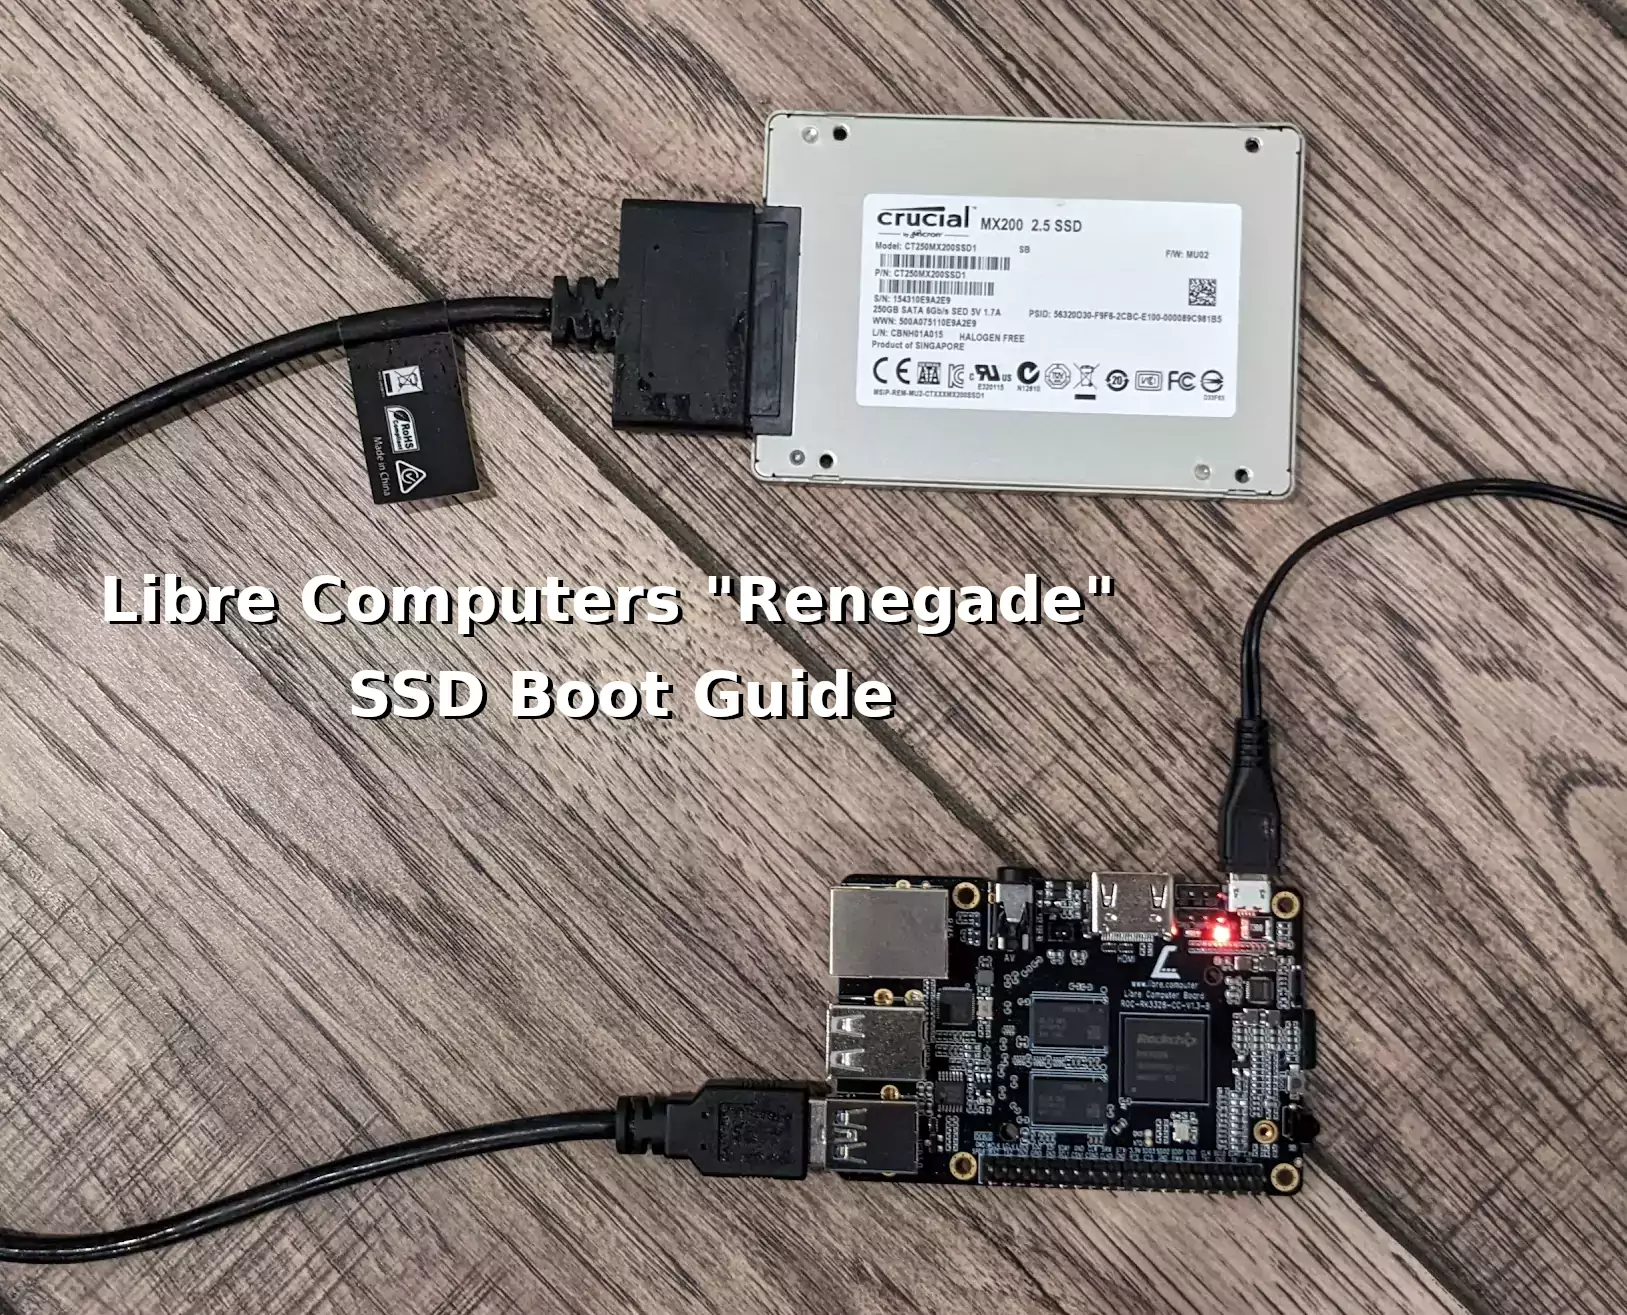 Libre Computers "Renegade" SSD Boot Guide